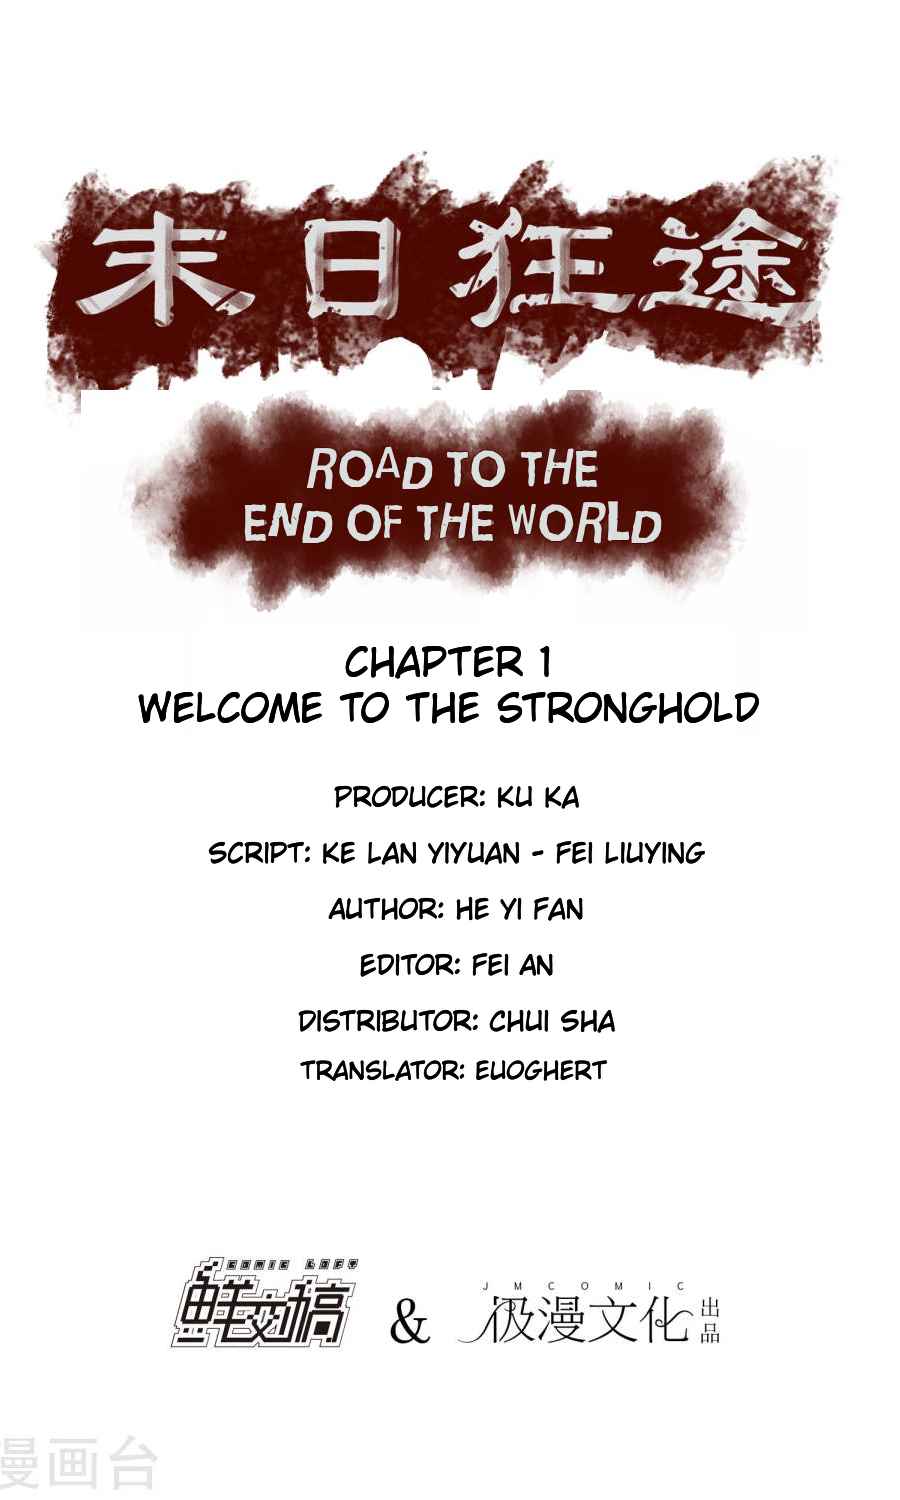 Road to the End of the World Ch. 1 Welcome to the Stronghold